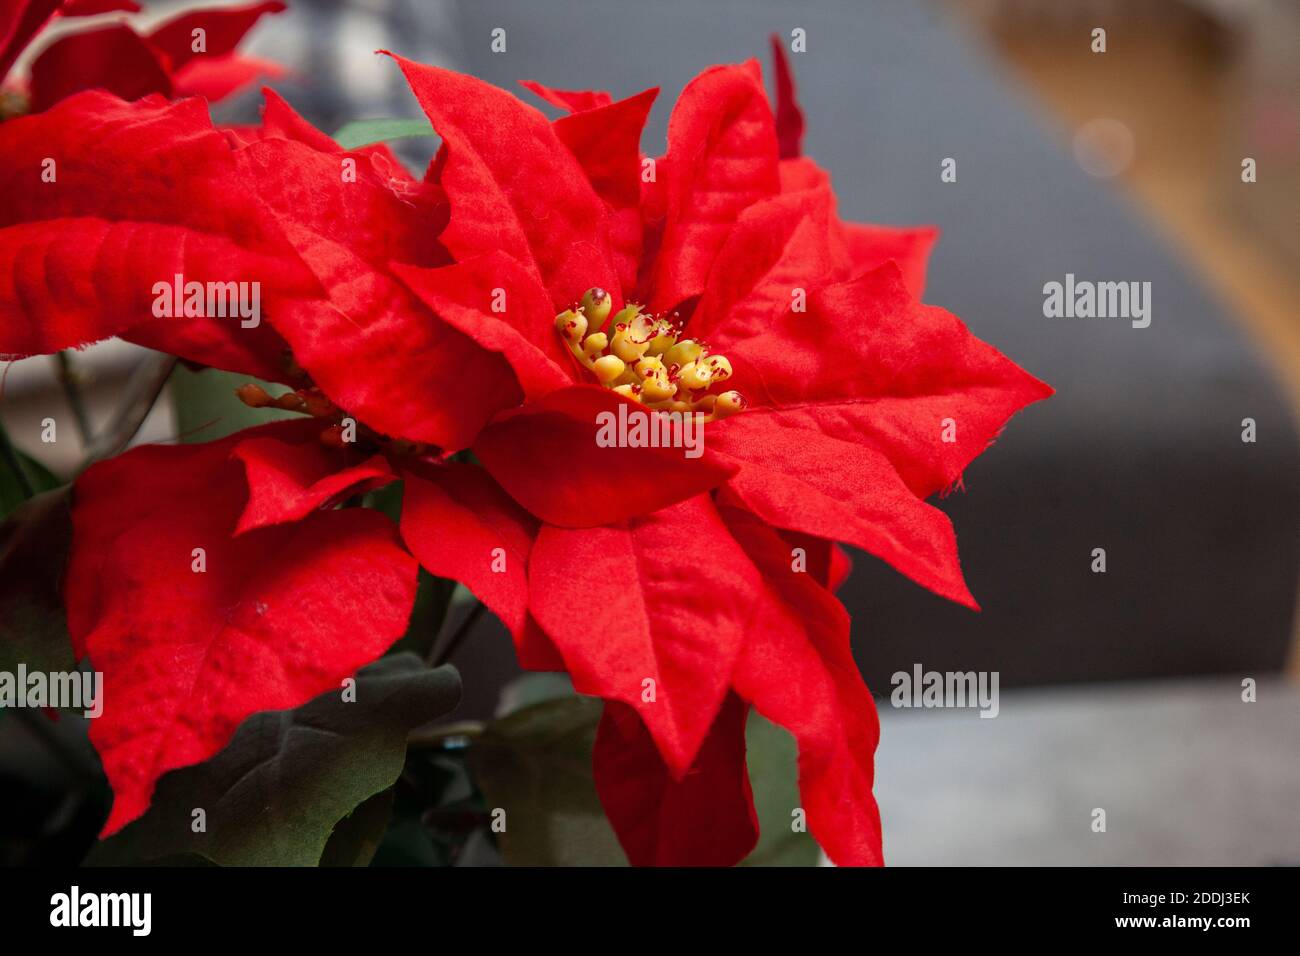 close up view of a fake red poinsettia leaves decoration for the holidays Stock Photo